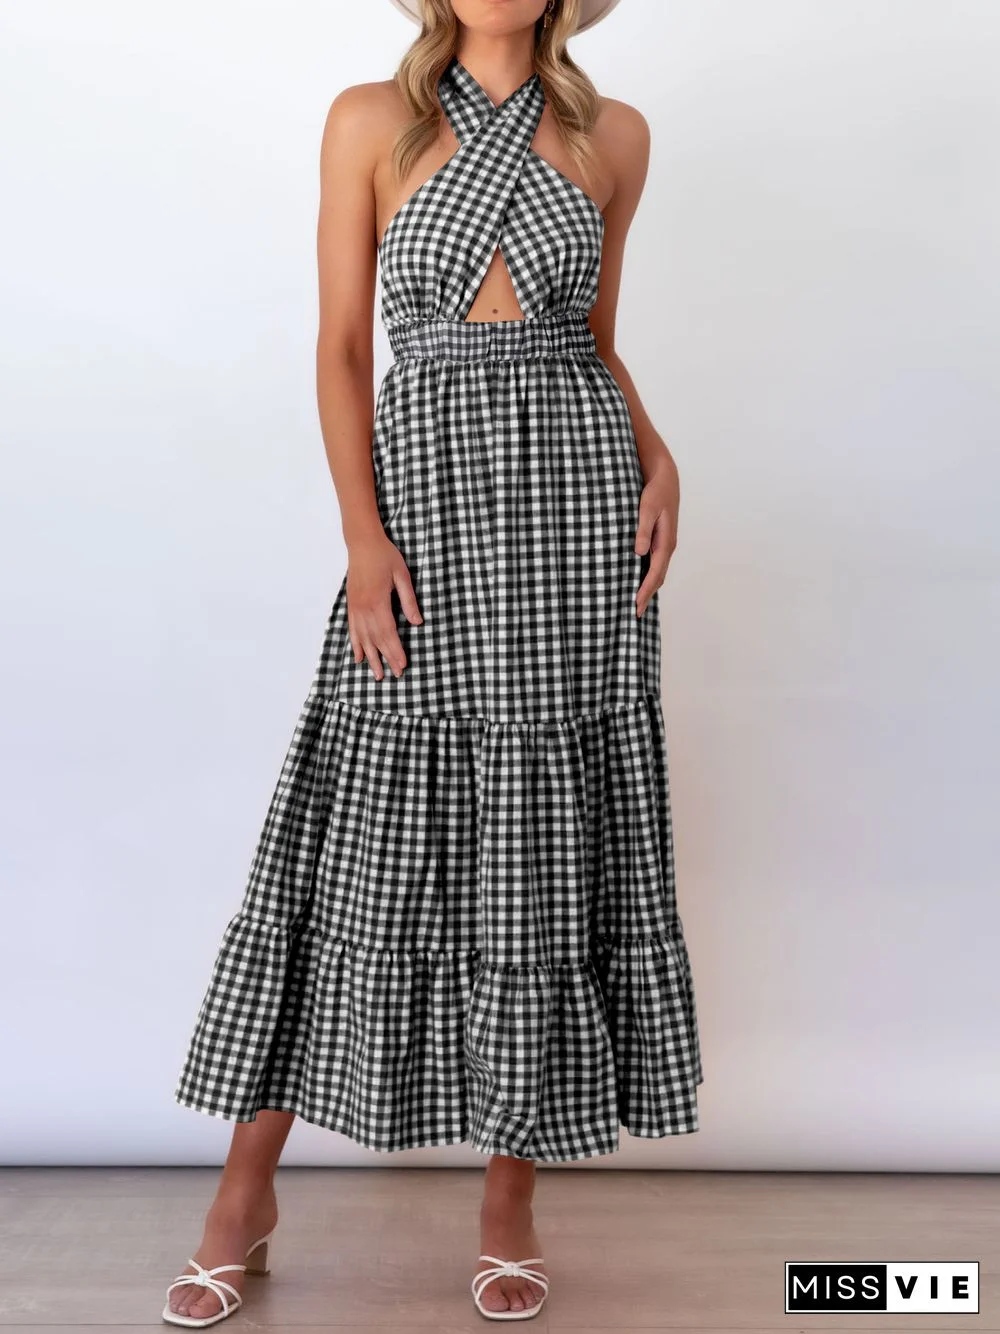 Checked/Plaid Casual Halter Short sleeve Woven Dress